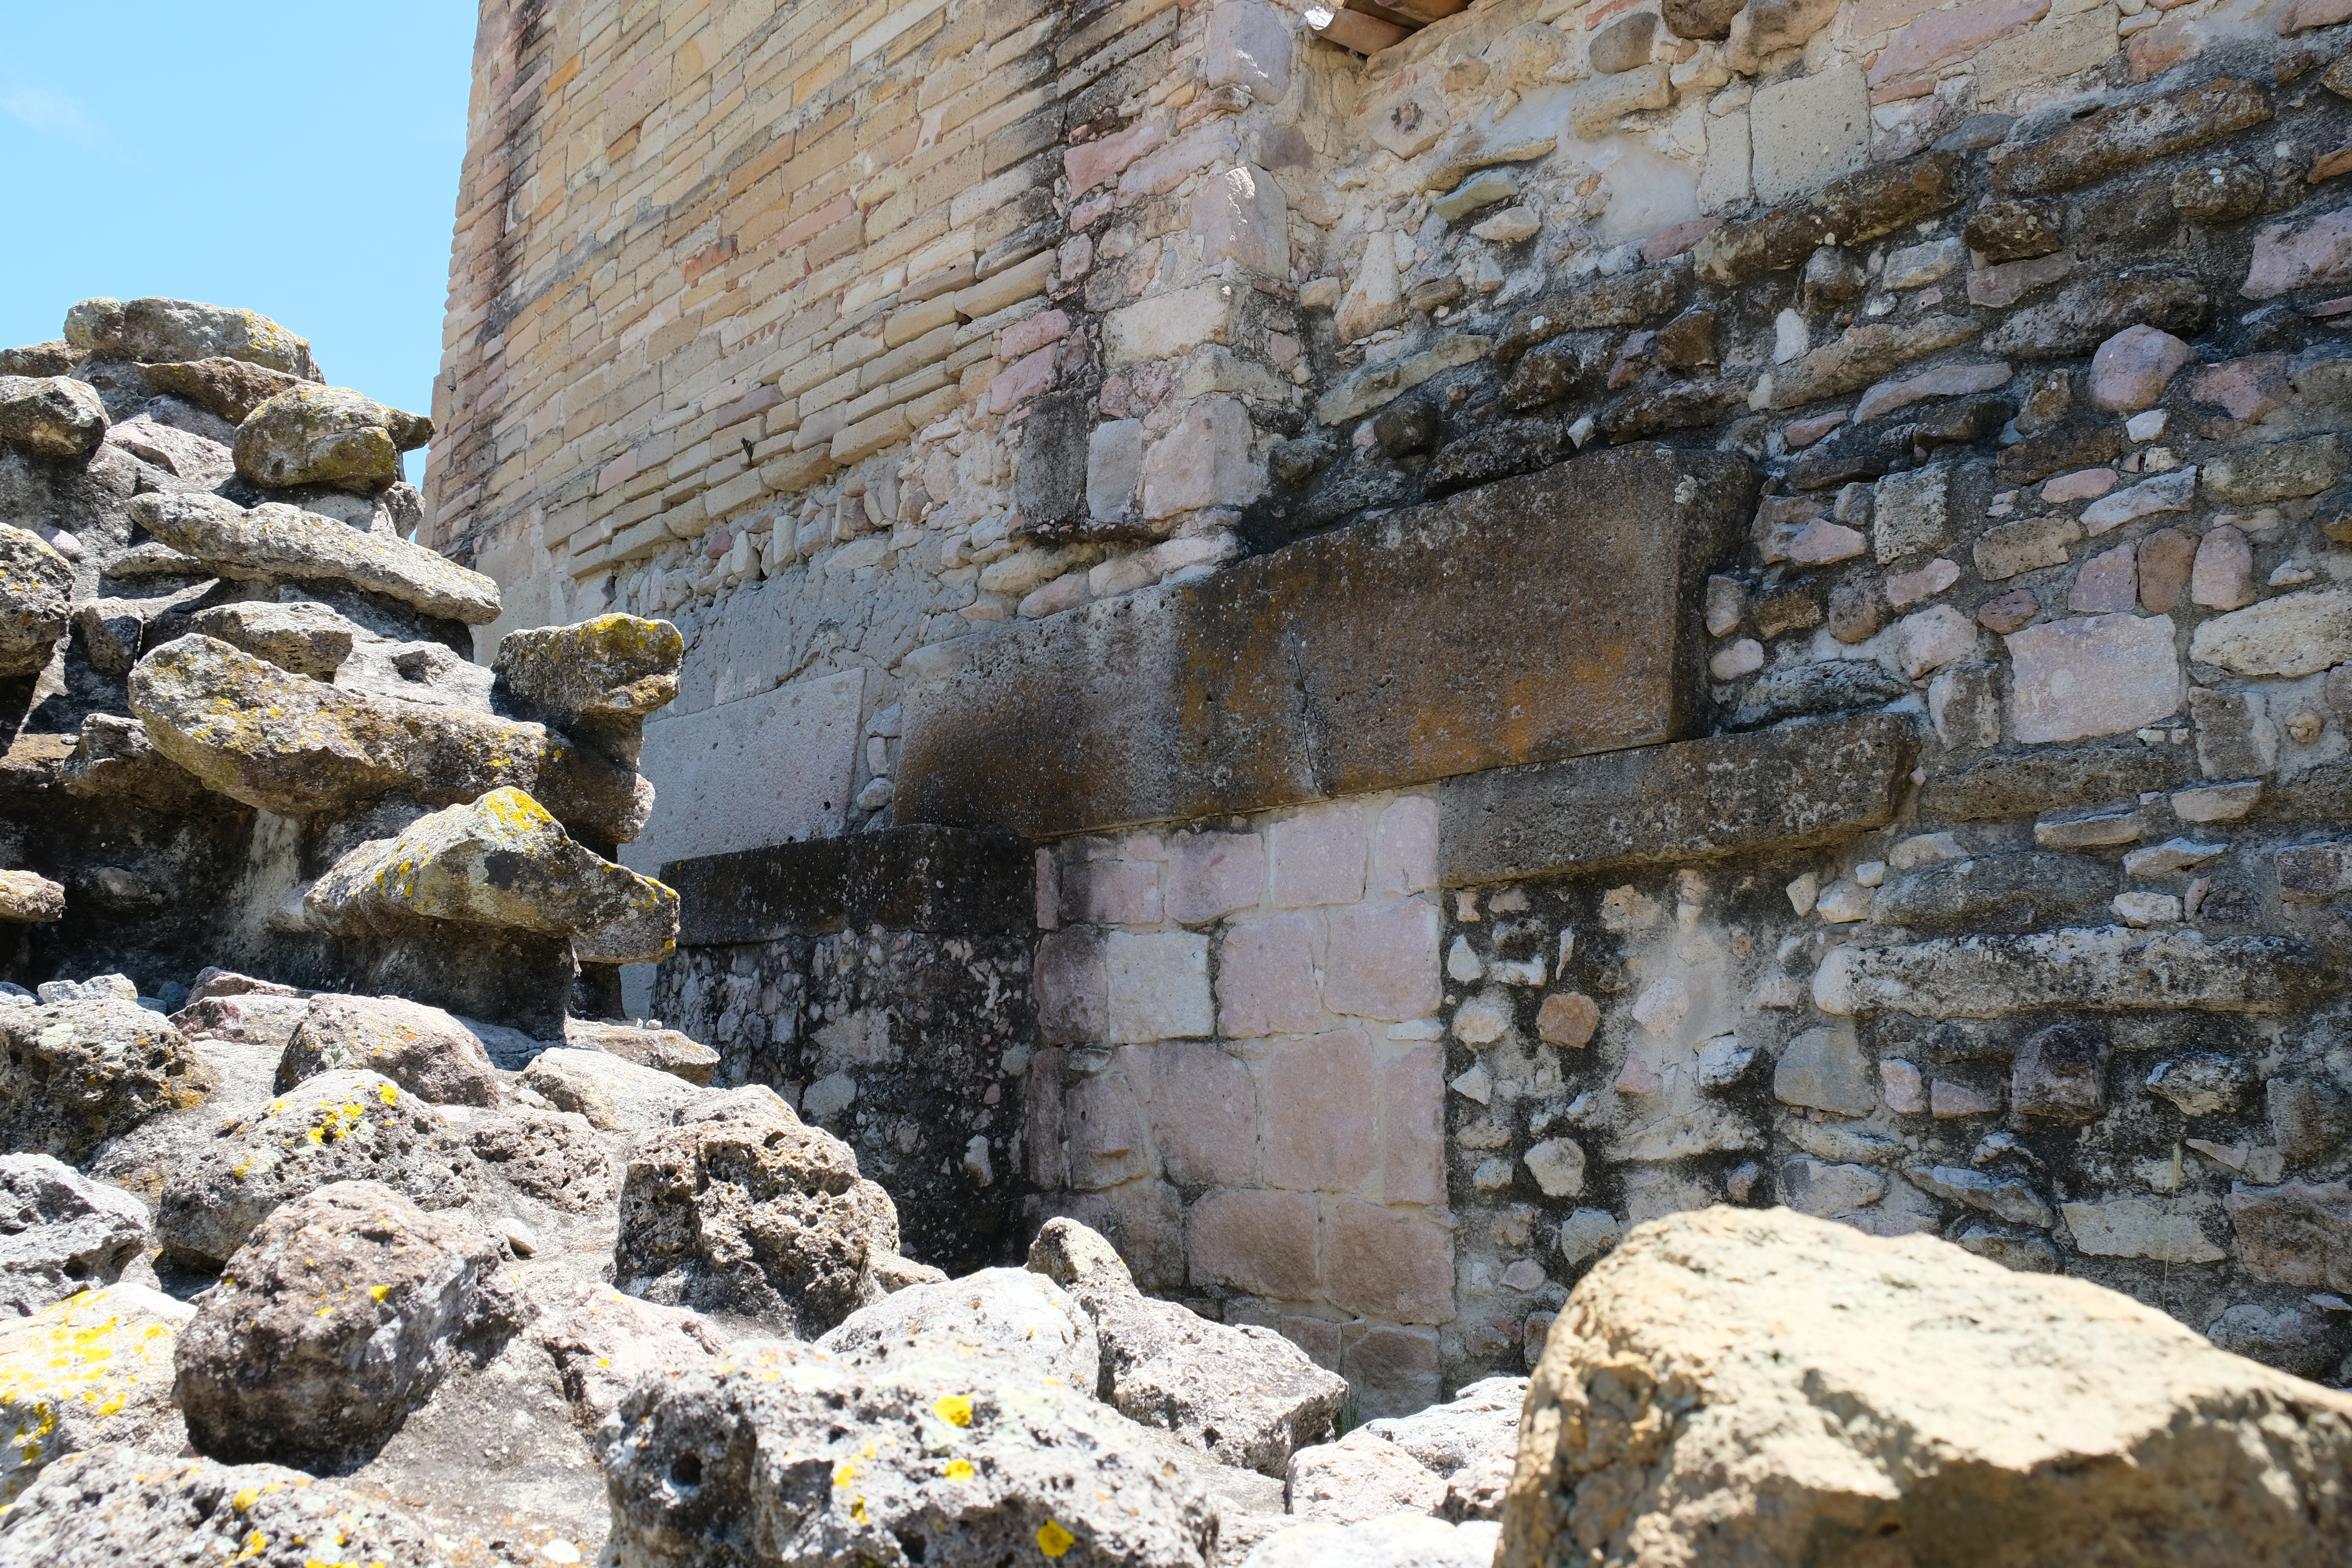 West Side of the Church of San Pablo showing details of the wall that is half-ruins from the original indigenous structure.